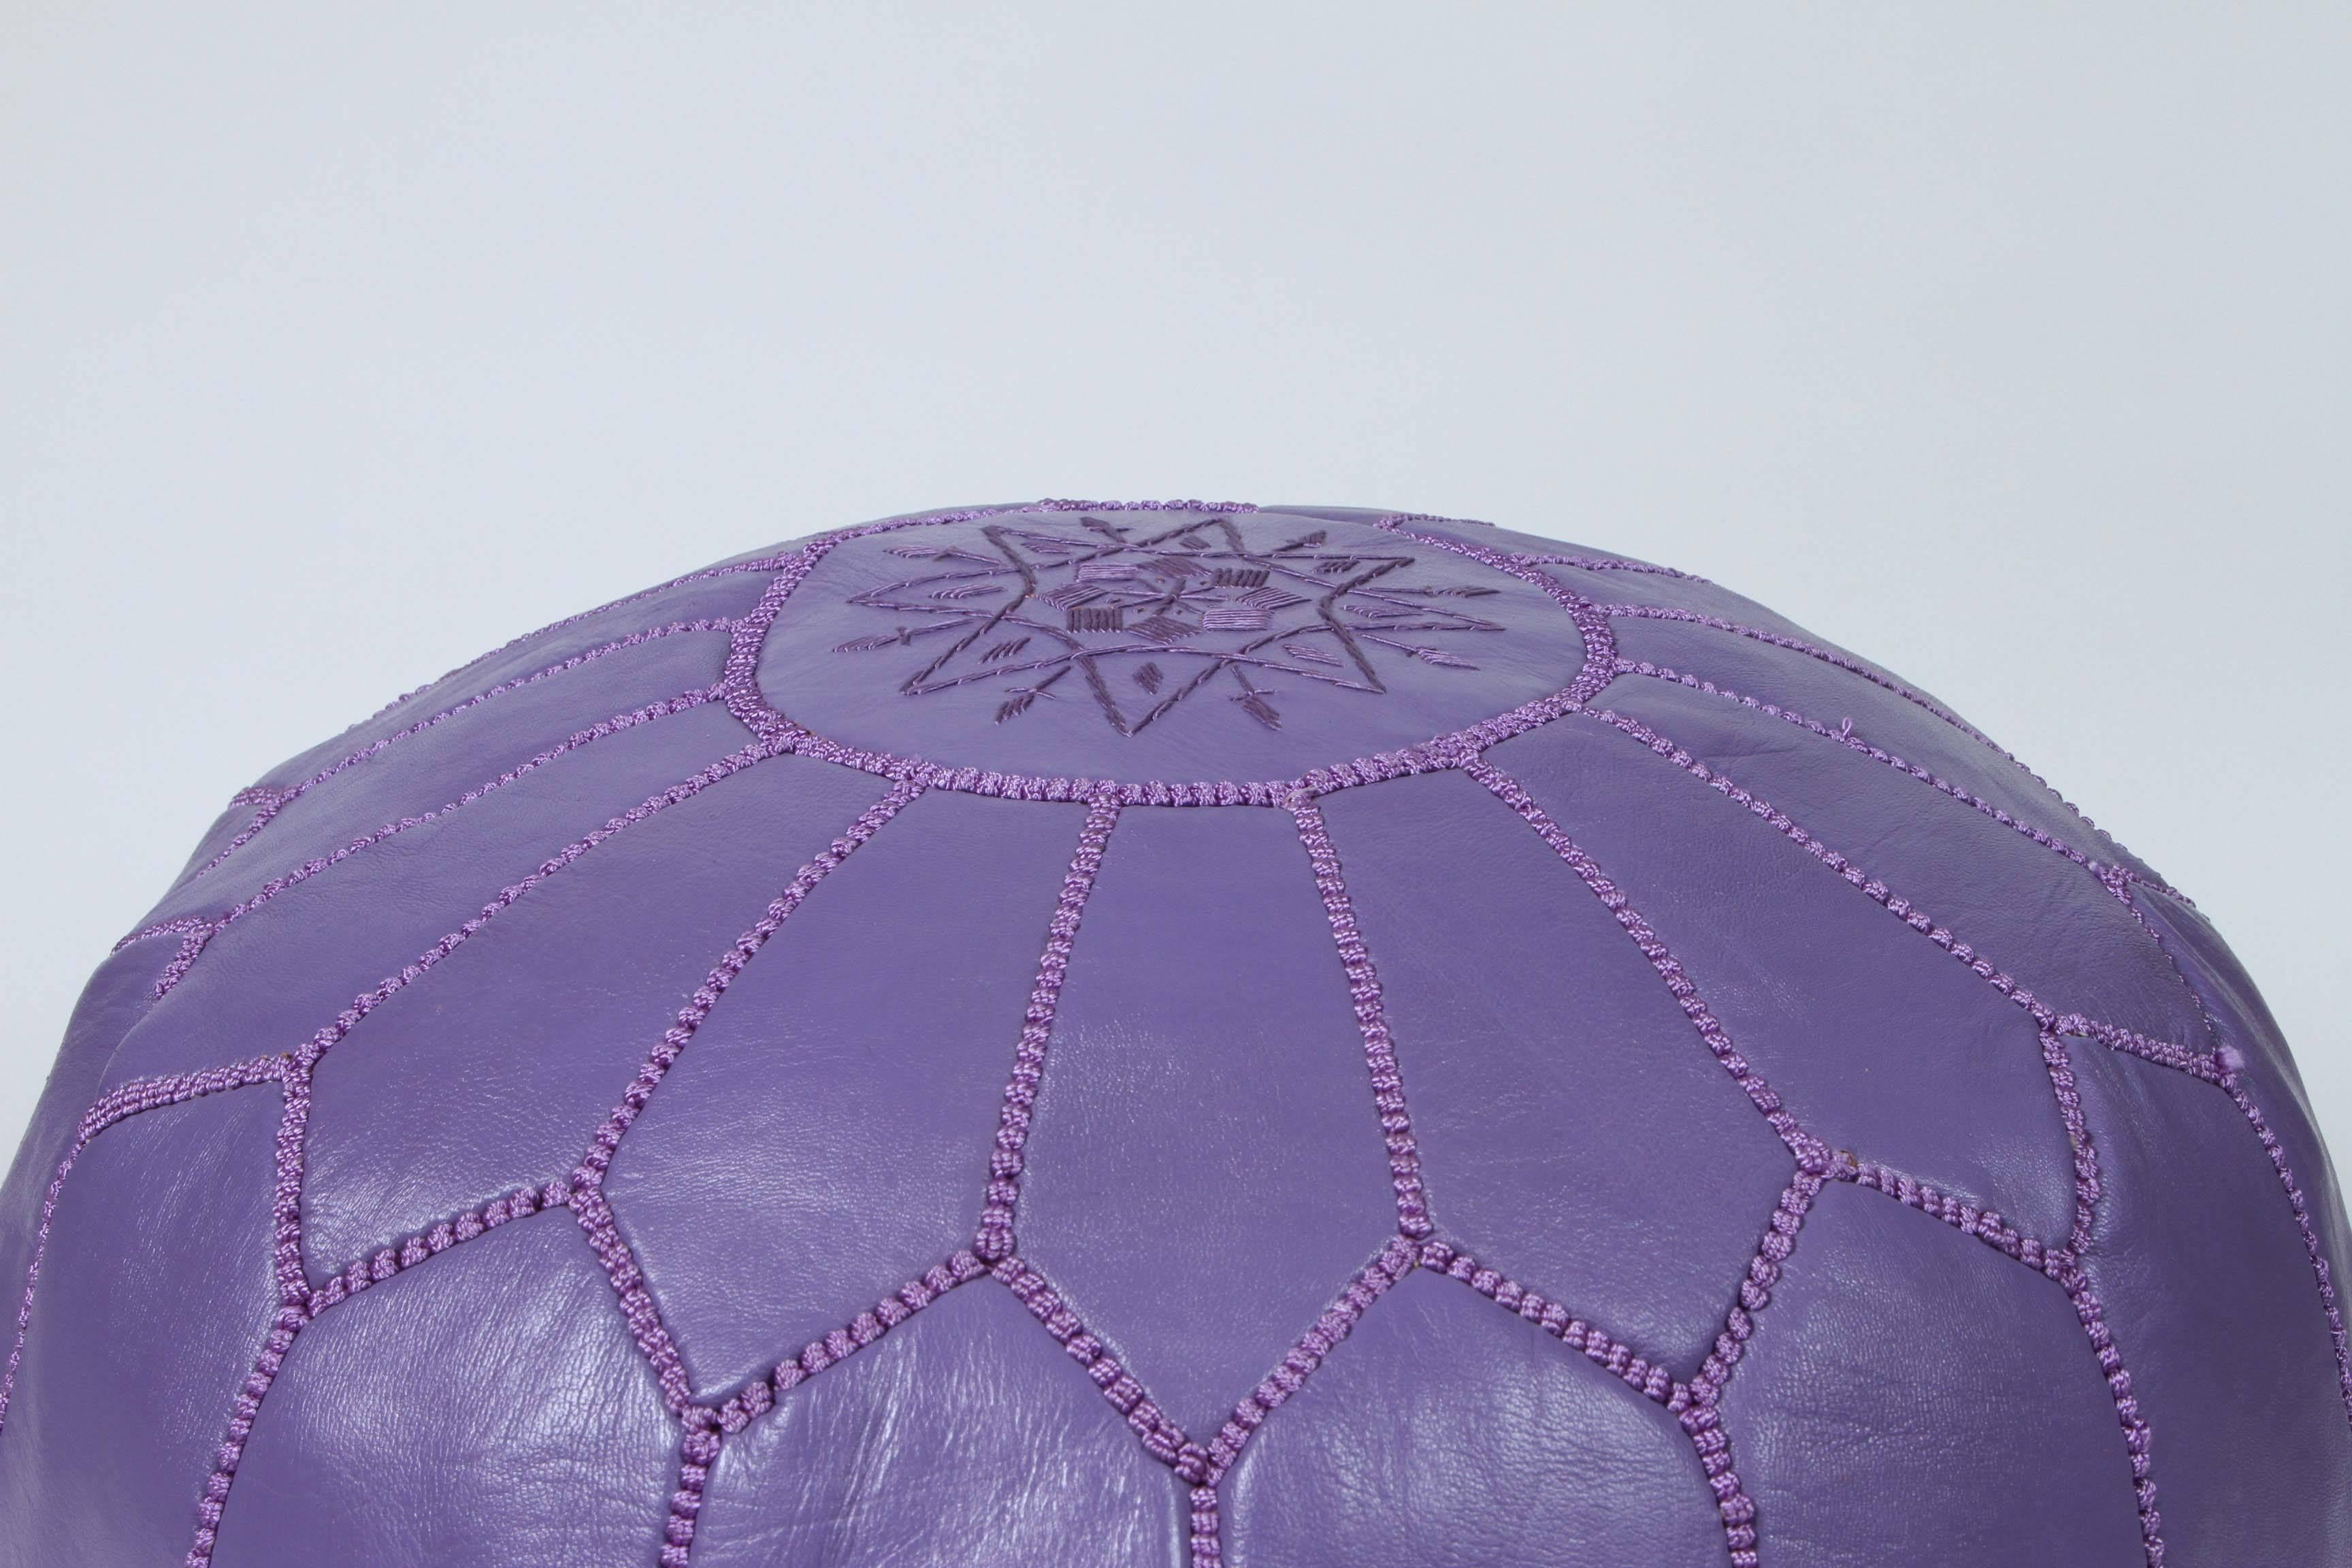 Moroccan handcrafted leather ottoman, with embroideries.
Could be used a foot stool or side table or ottoman.
The Moroccan leather poufs are hand-tooled by artisans and embroidered with silk tread.
Very nice handmade Moroccan lavender color